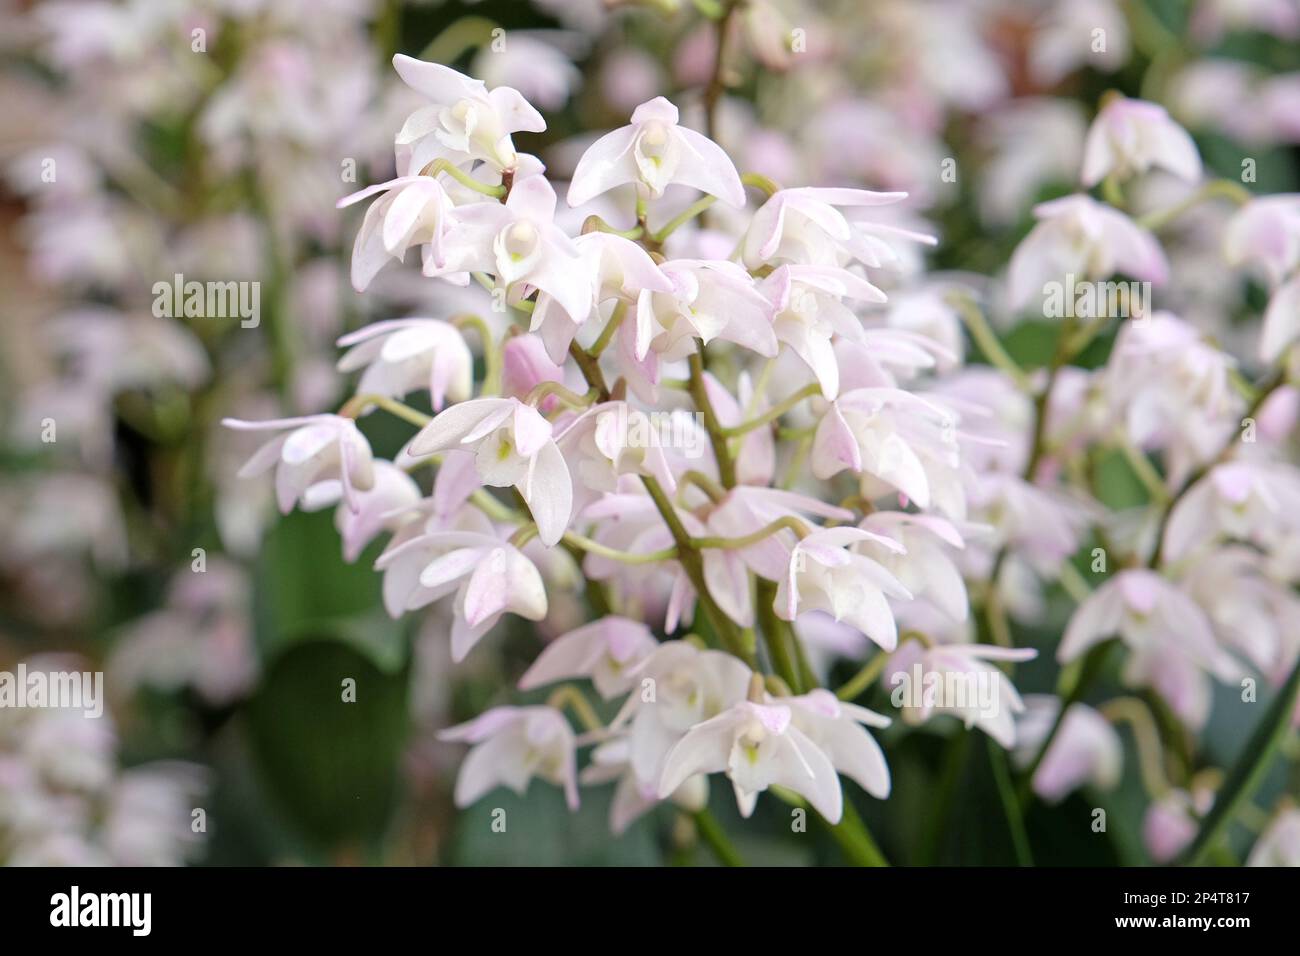 Dendrobium Gillian Leaney Alba orchid in flower. Stock Photo